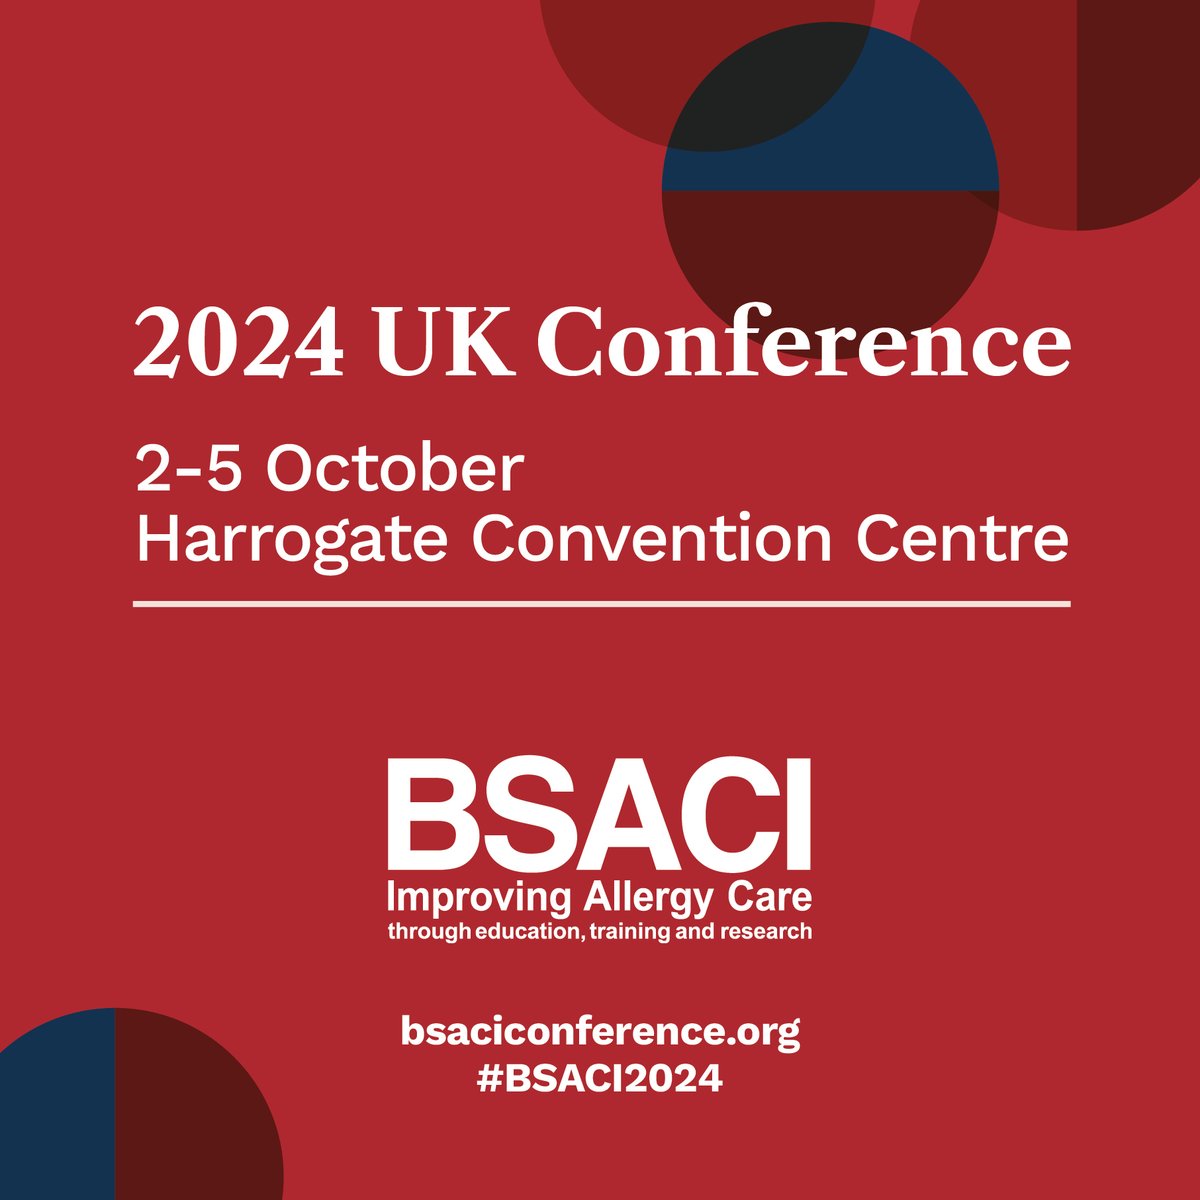 #BSACI2024: early bird registration is now open! Please join us in Harrogate on Wednesday 2nd-Saturday 5th October 2024. View the preliminary programme, submit your abstract by Monday 10th June and register at bsaciconference.org